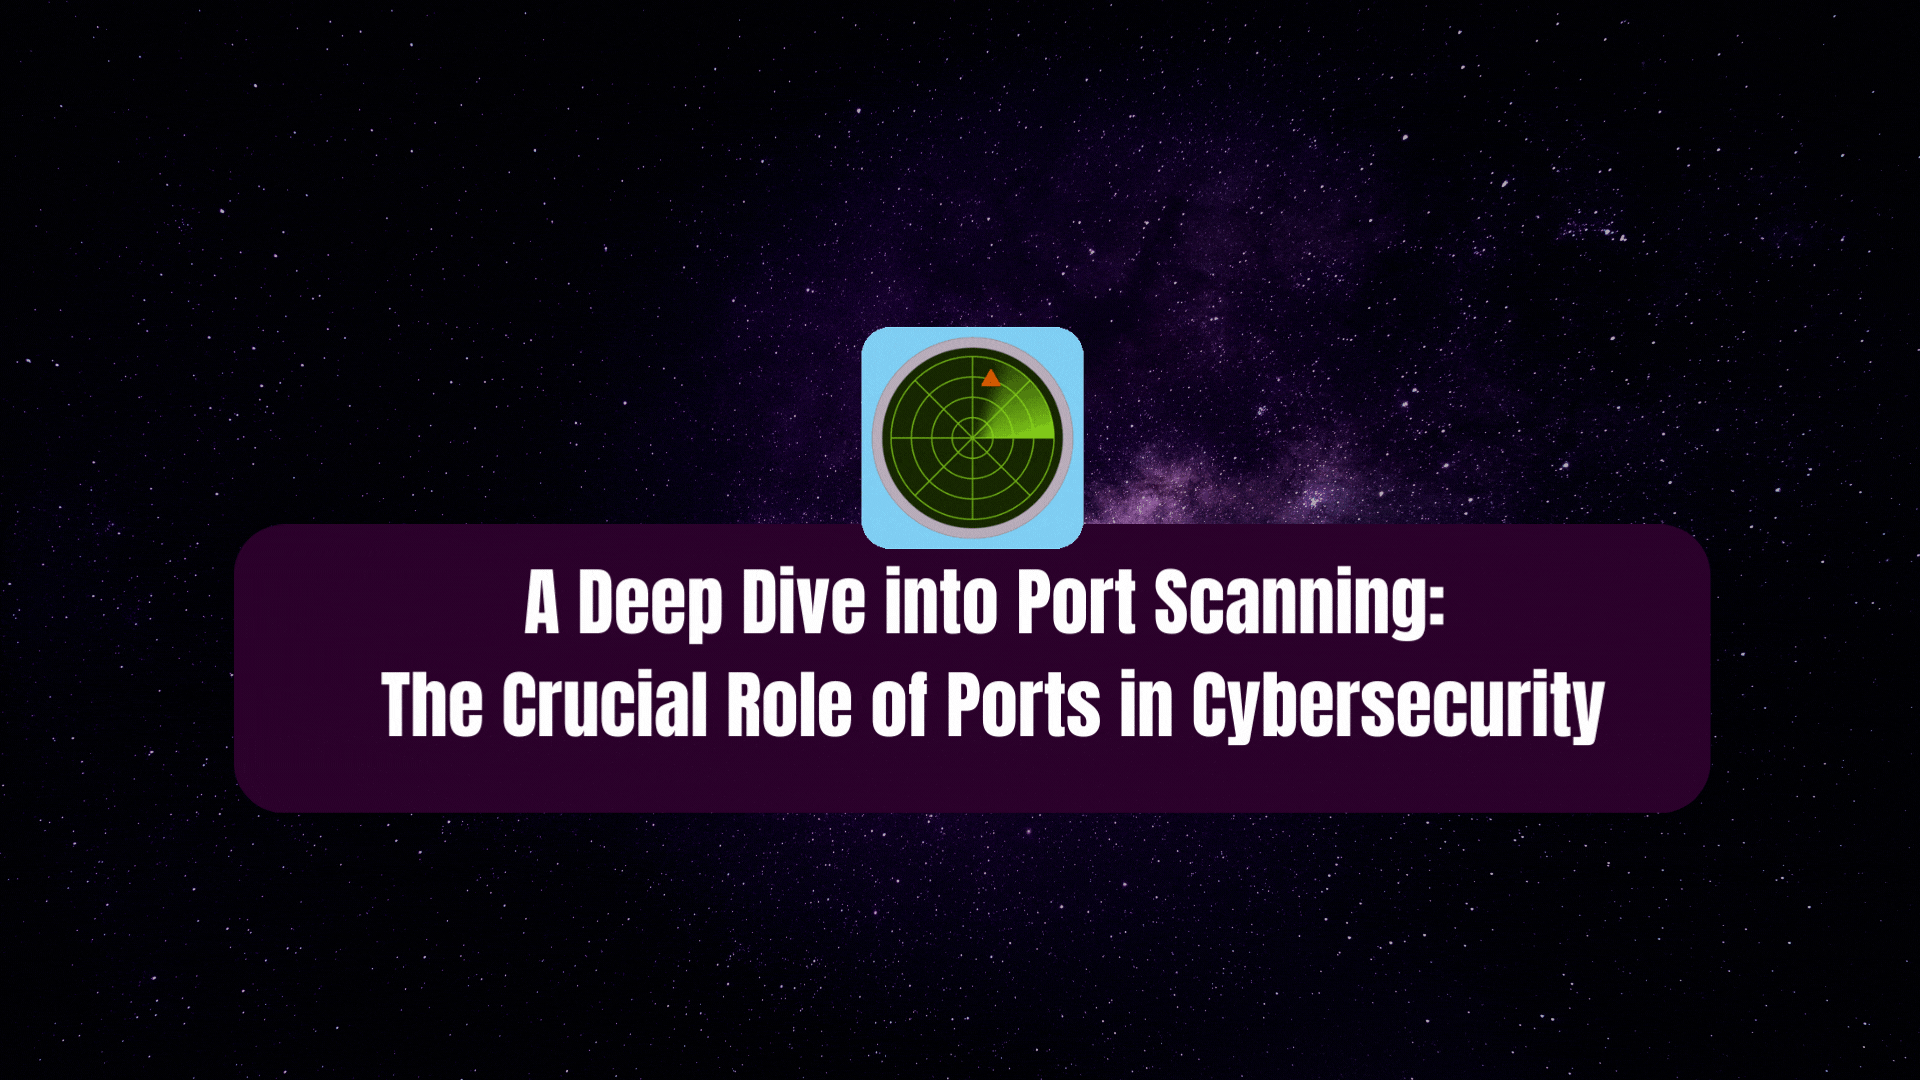 A Deep Dive into Port Scanning The Crucial Role of Ports in Cybersecurity